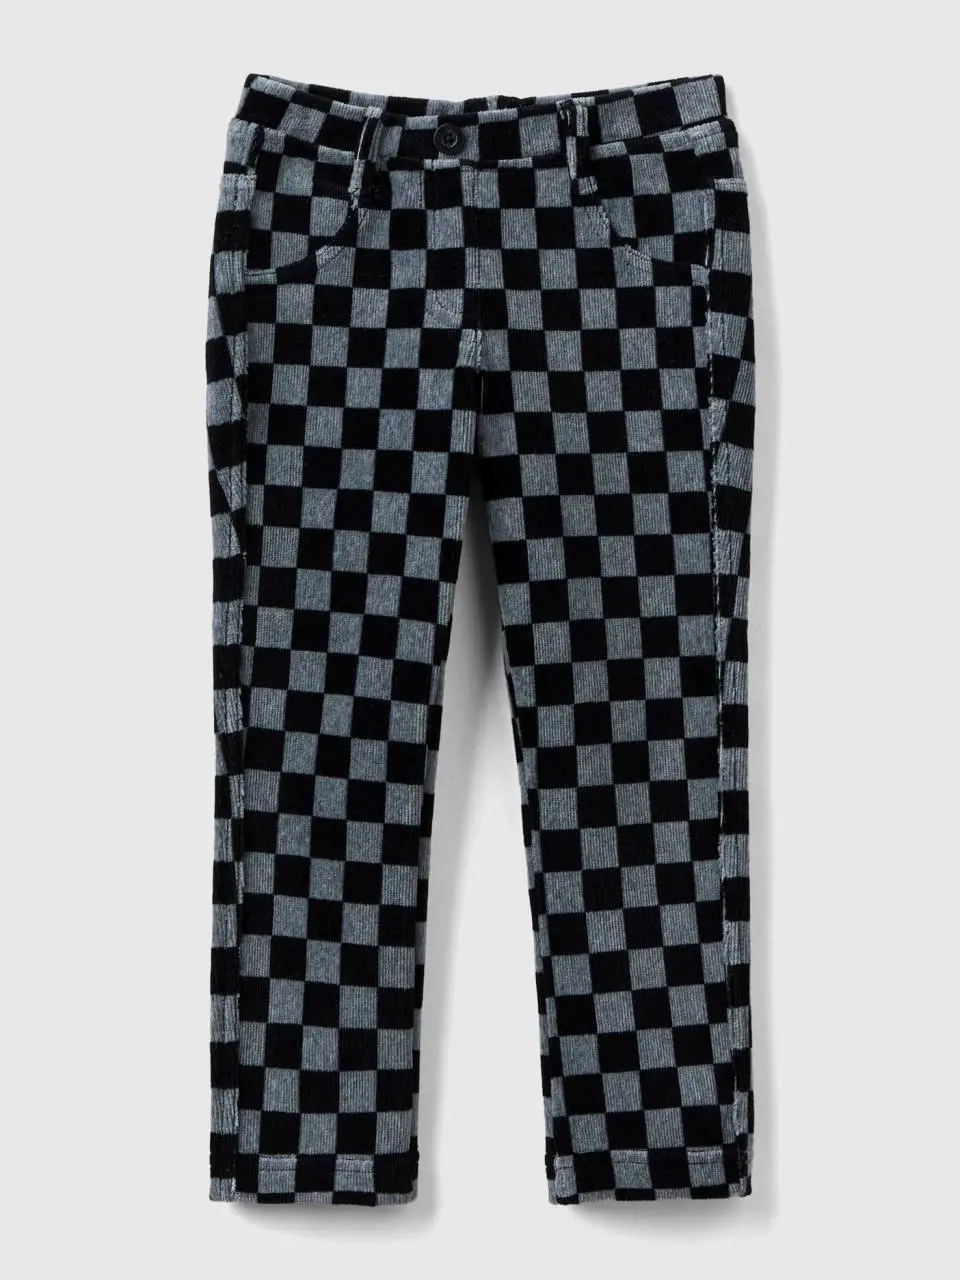 Benetton black jeggings with checkered print. 1